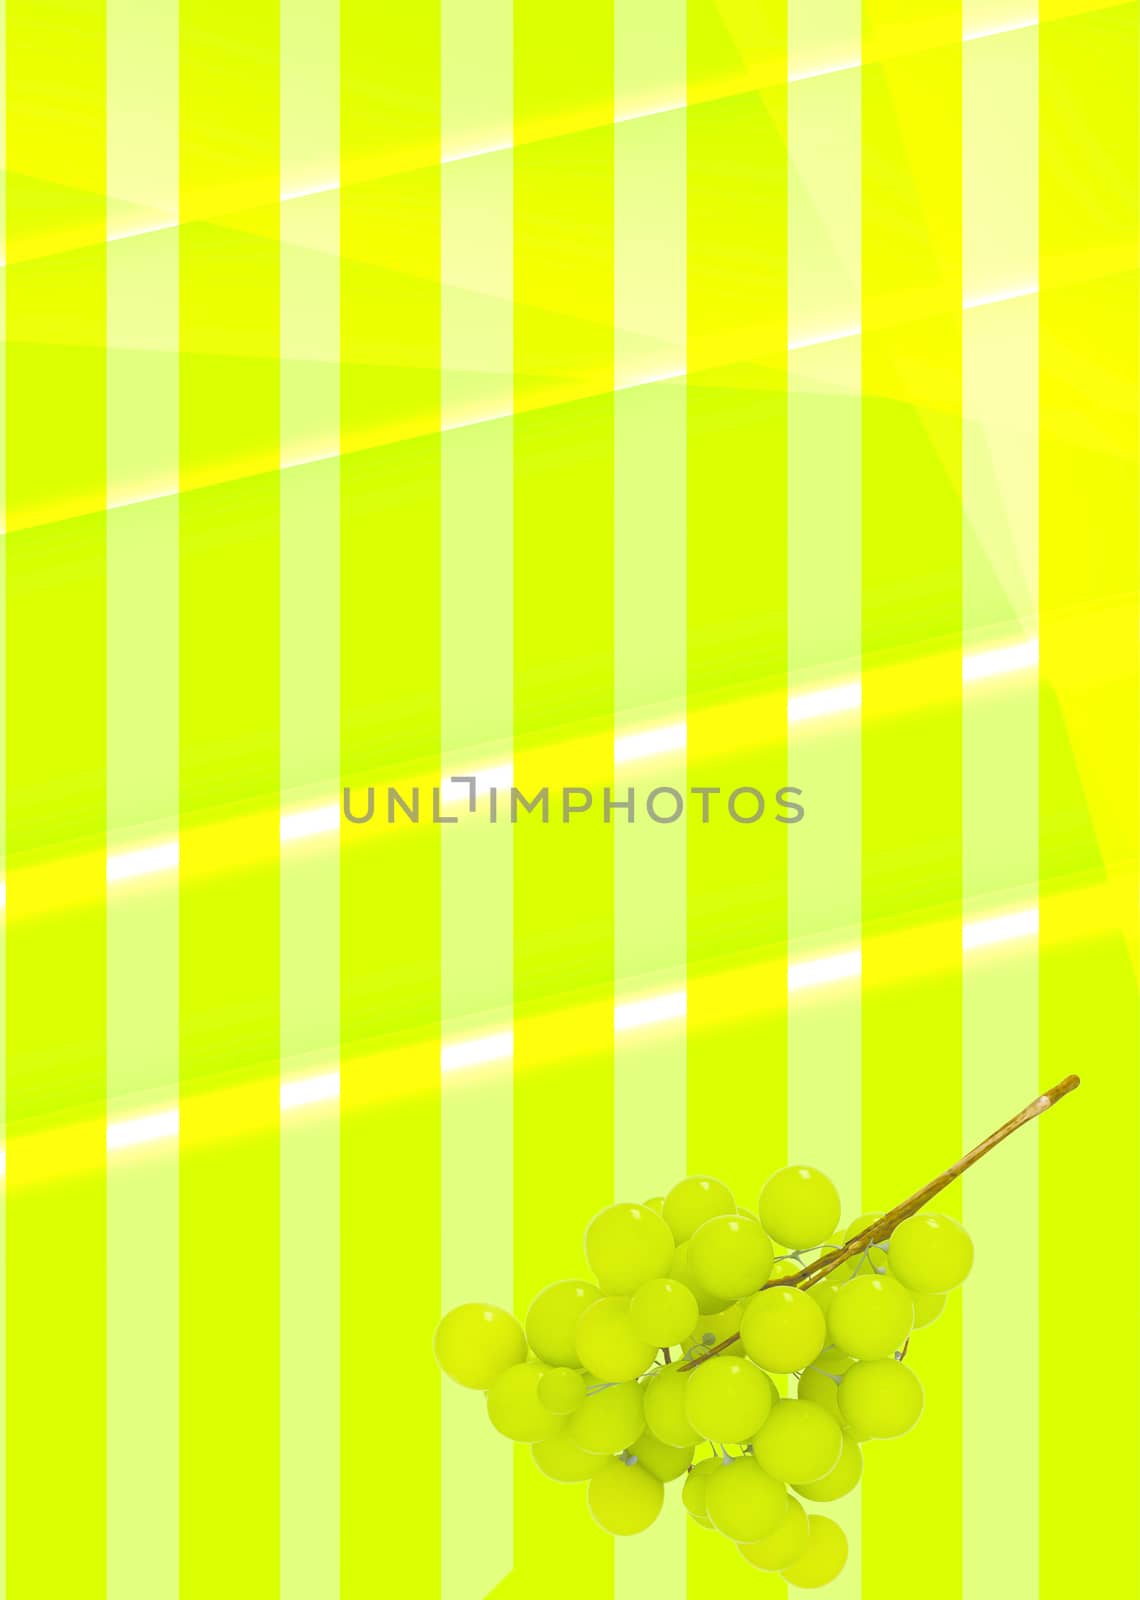 background of colored bands with grapes